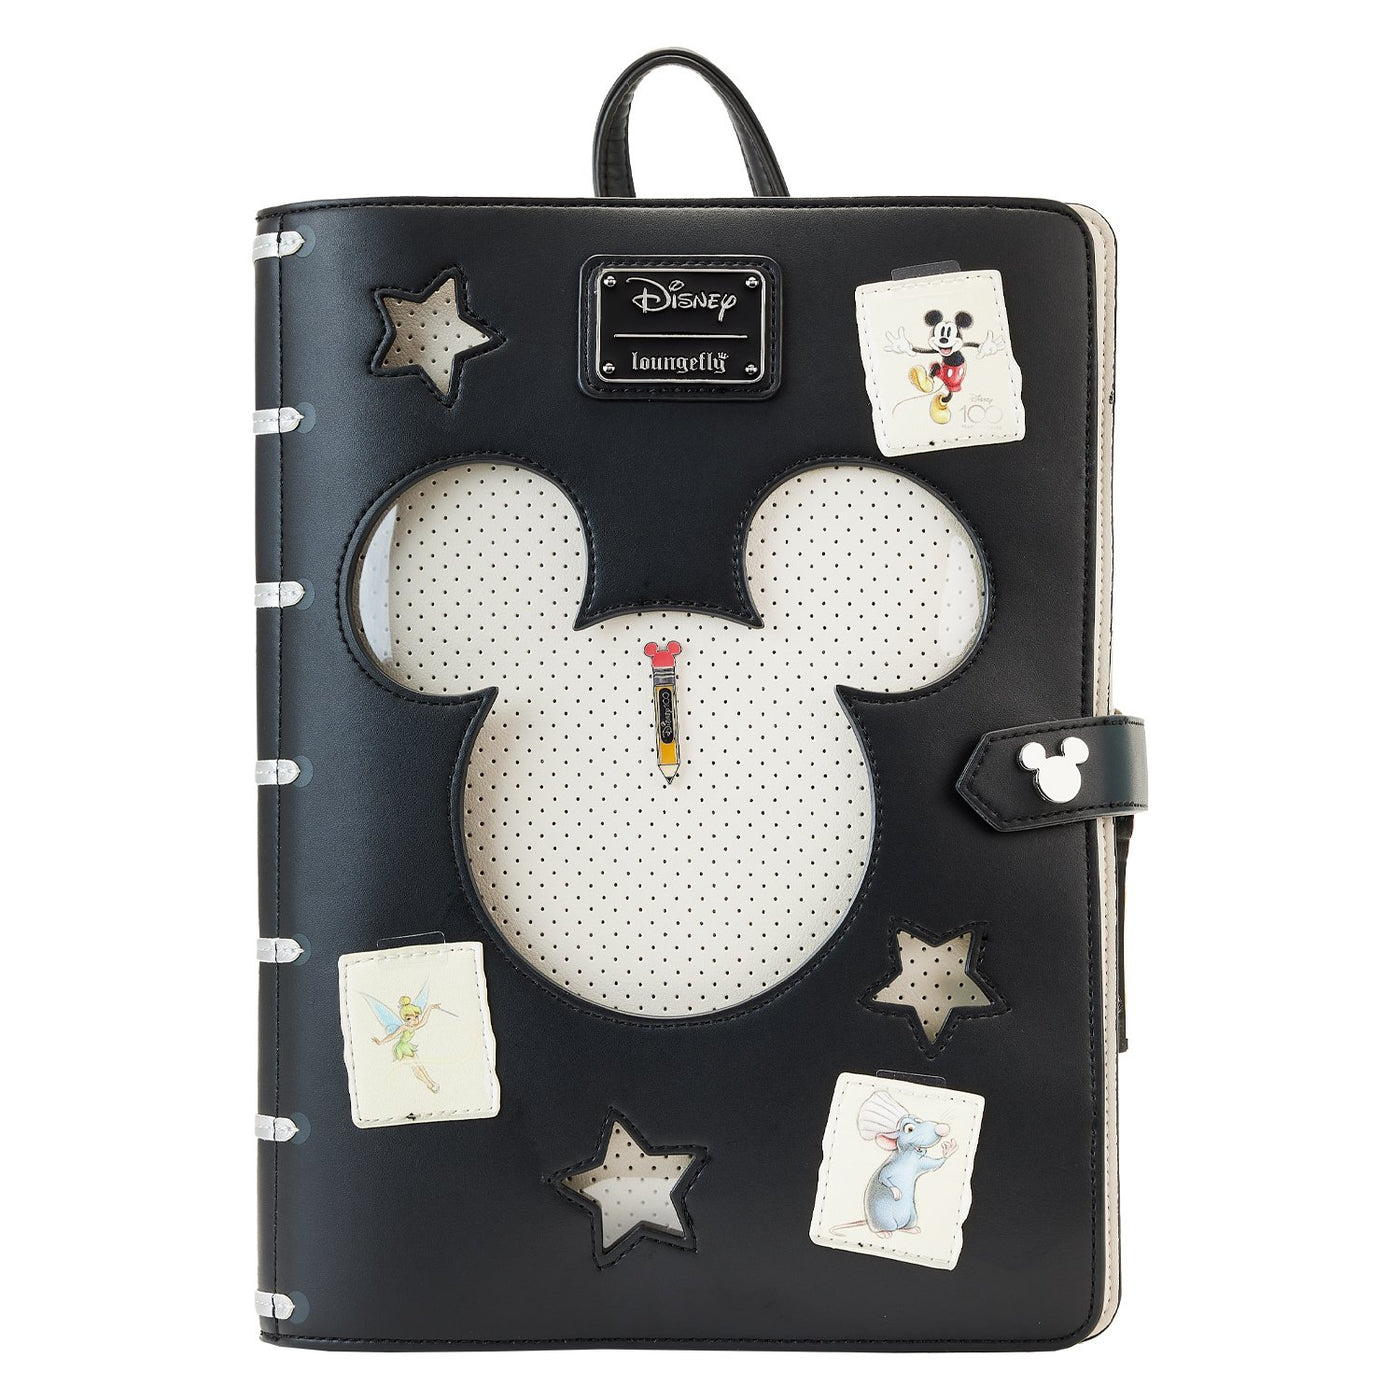 671803467996 - Loungefly Disney 100th Anniversary Sketchbook Pin Trader Backpack - Front